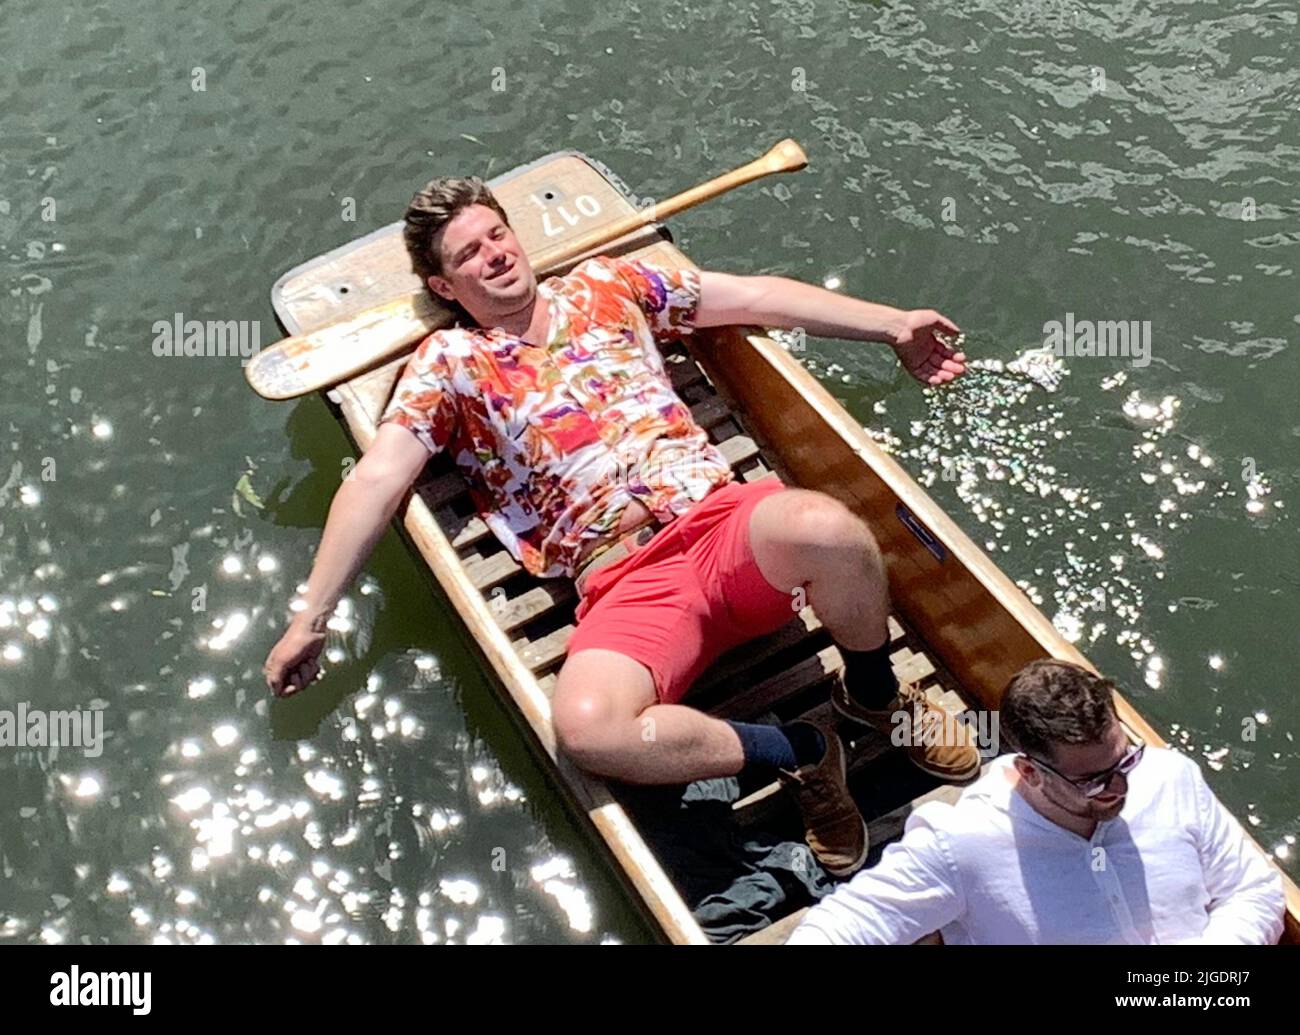 Cambridge, UK 10th July 2022. Tourists enjoy the hot weather punting on the River Cam in Cambridge. Credit: Headlinephoto/Alamy Live News. Stock Photo